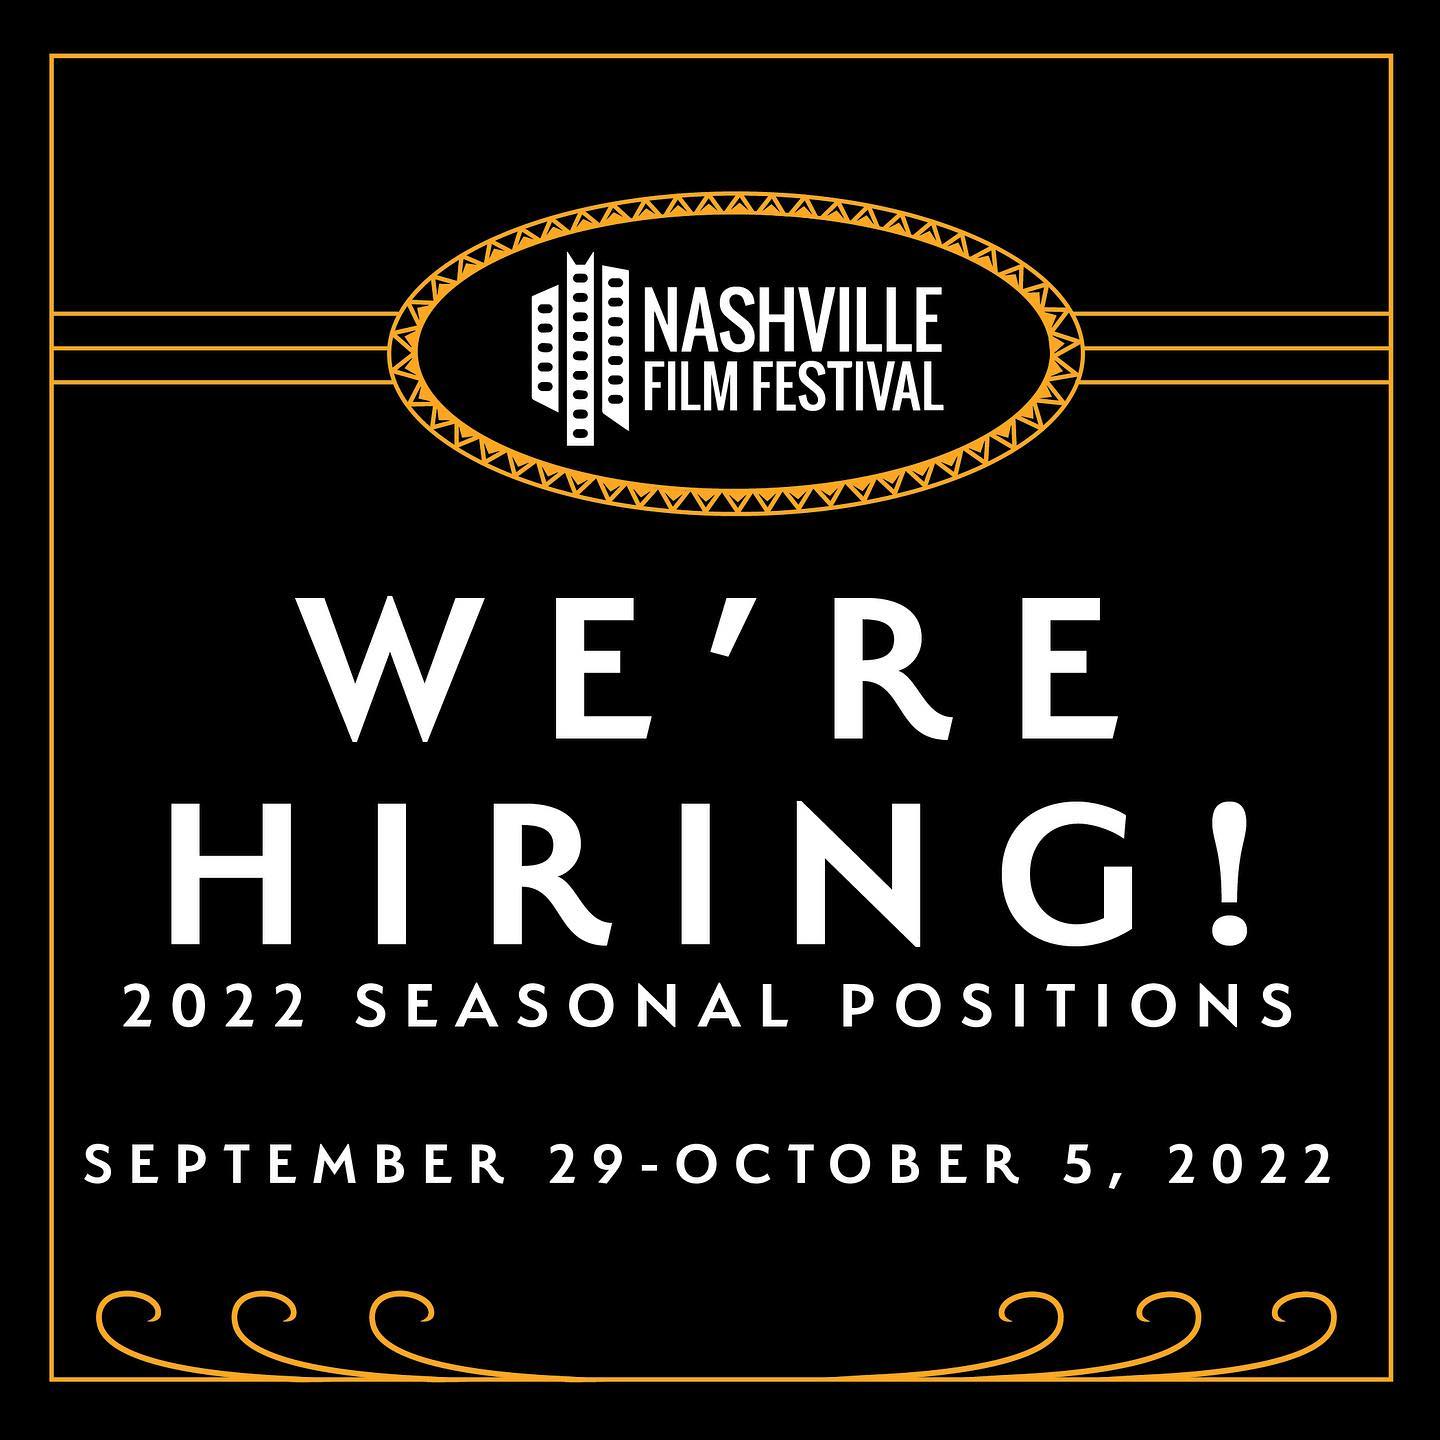 We’re hiring! Nashville Film Festival is currently seeking exceptional and motivated professionals to join our team for the 2022 season. This team will drive operational success, represent the NashFilm brand, and contribute to the overall mission of NashFilm’s nonprofit initiatives during 2022’s festival!
For job descriptions and to apply, visit the link in our bio!